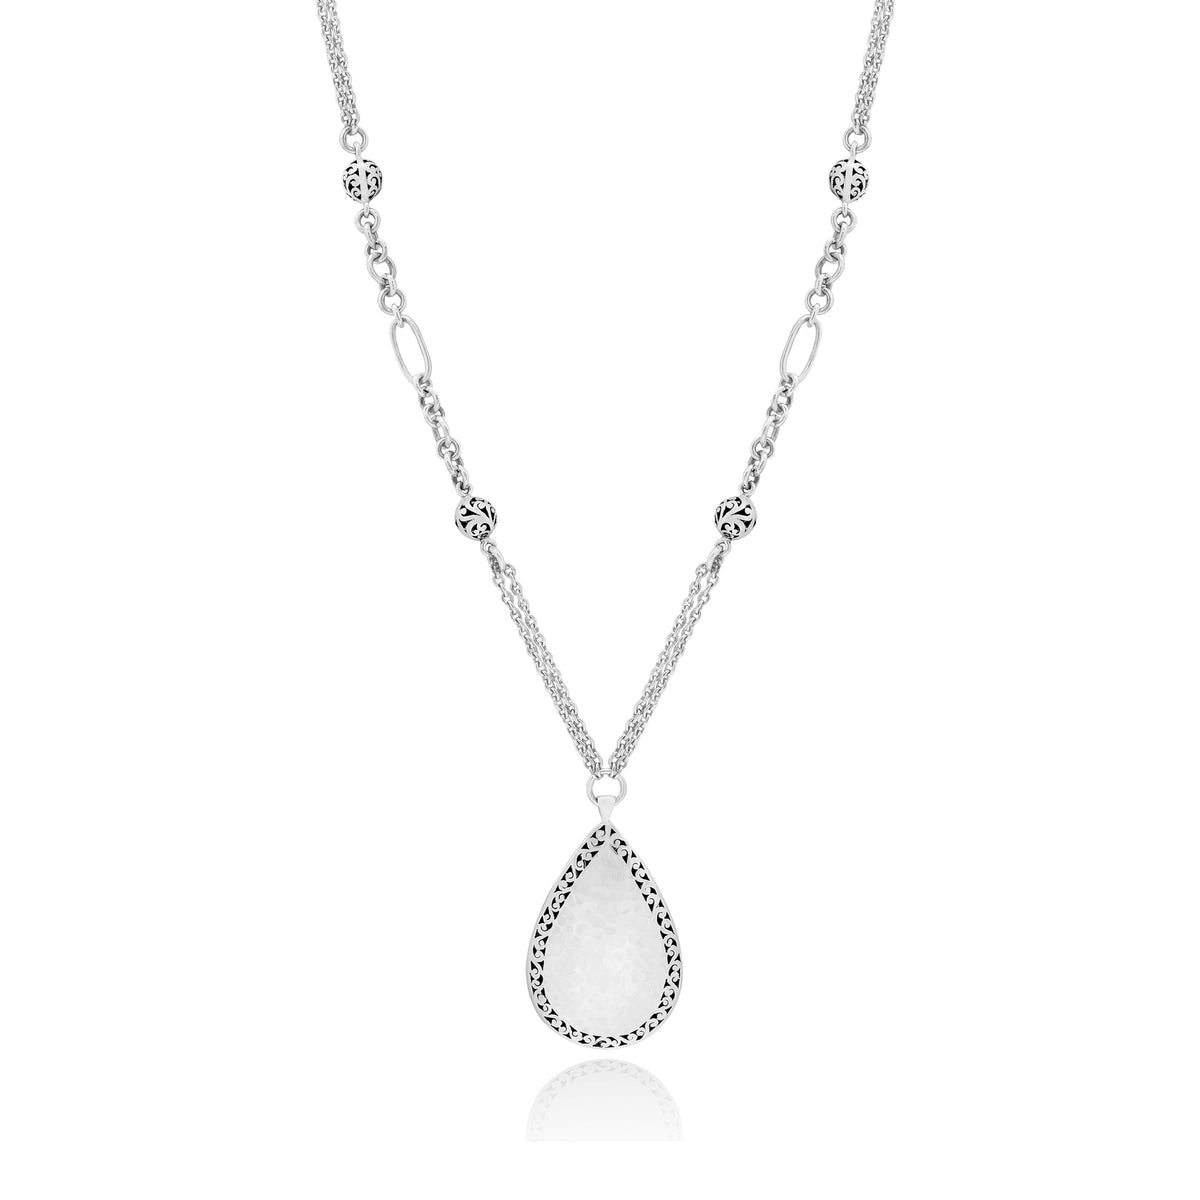 Classic Teardrop Hammered with Signature Scroll Border Pendant Necklace - Lois Hill Jewelry